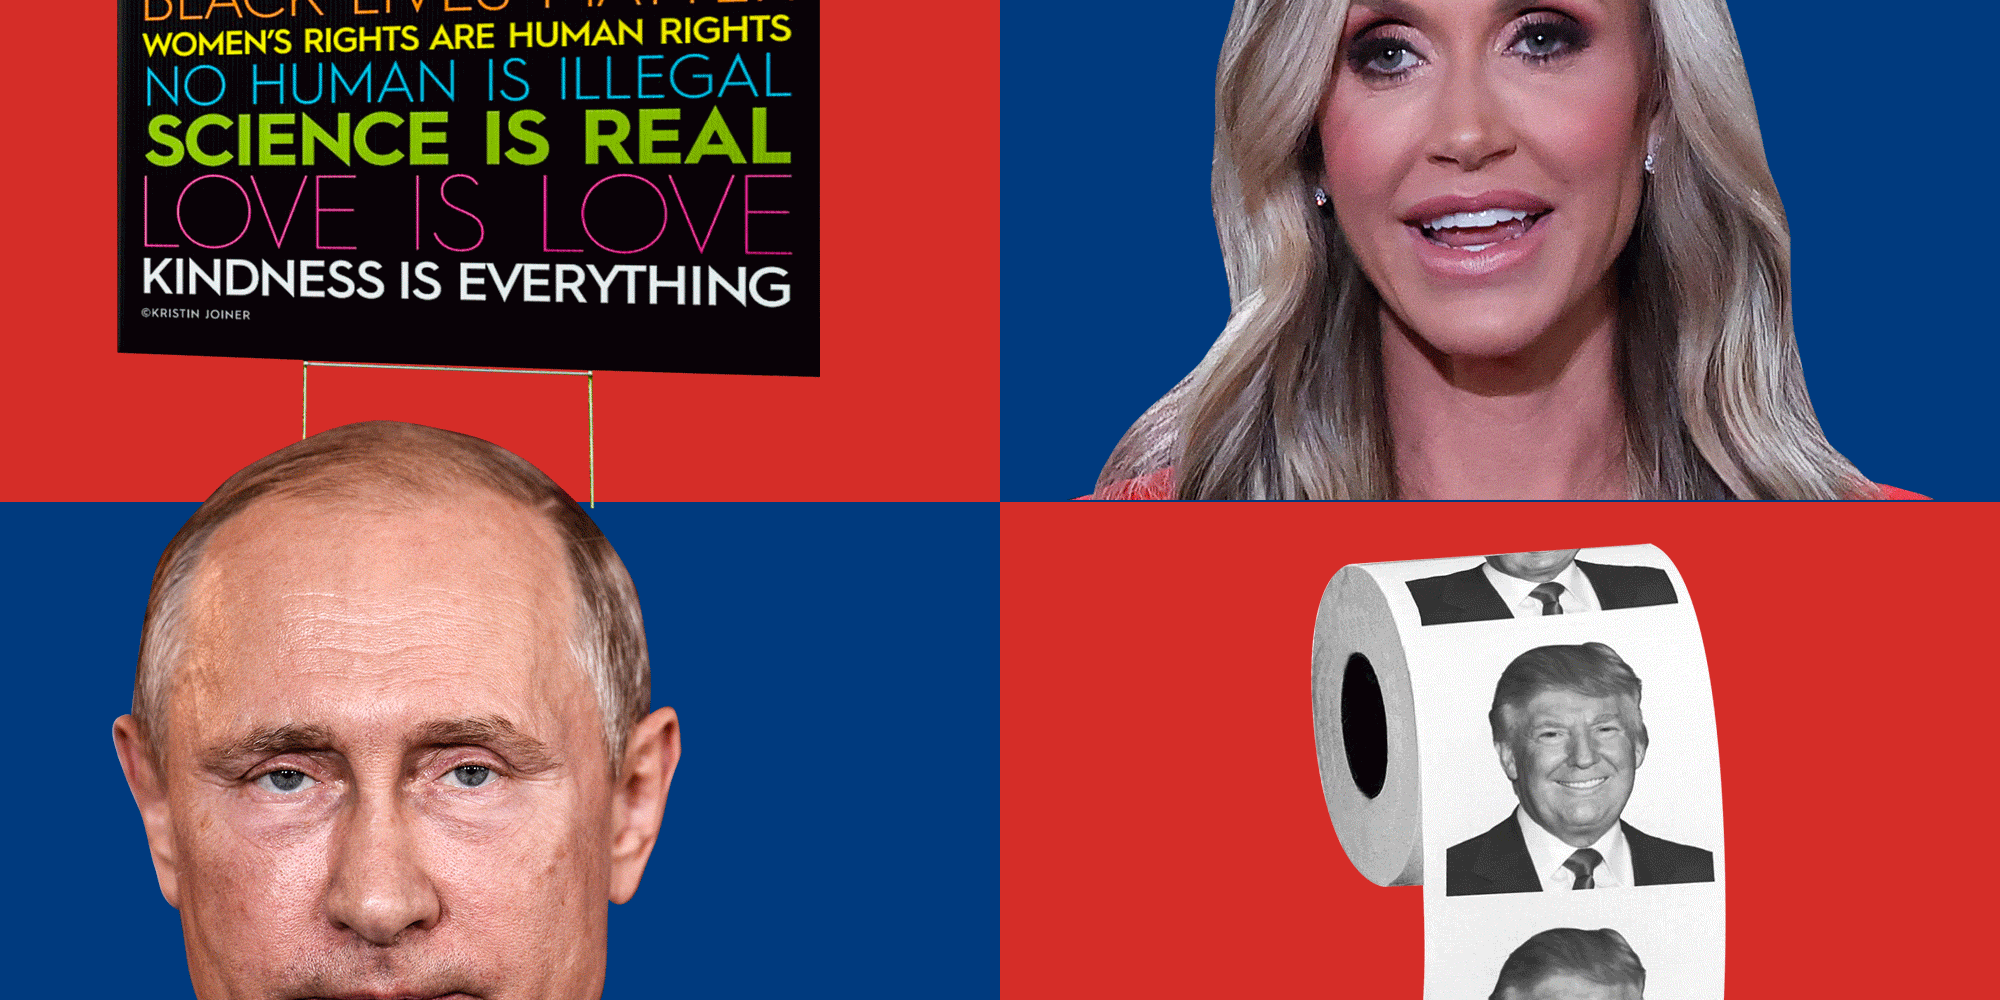 Trump toilet paper, Lara Trump, Putin, a "love is love" sign, Trump wine, Ivanka Trump, a shattered Twitter logo, and the Palm Beach Post in a grid with blinking red and blue backgrounds.